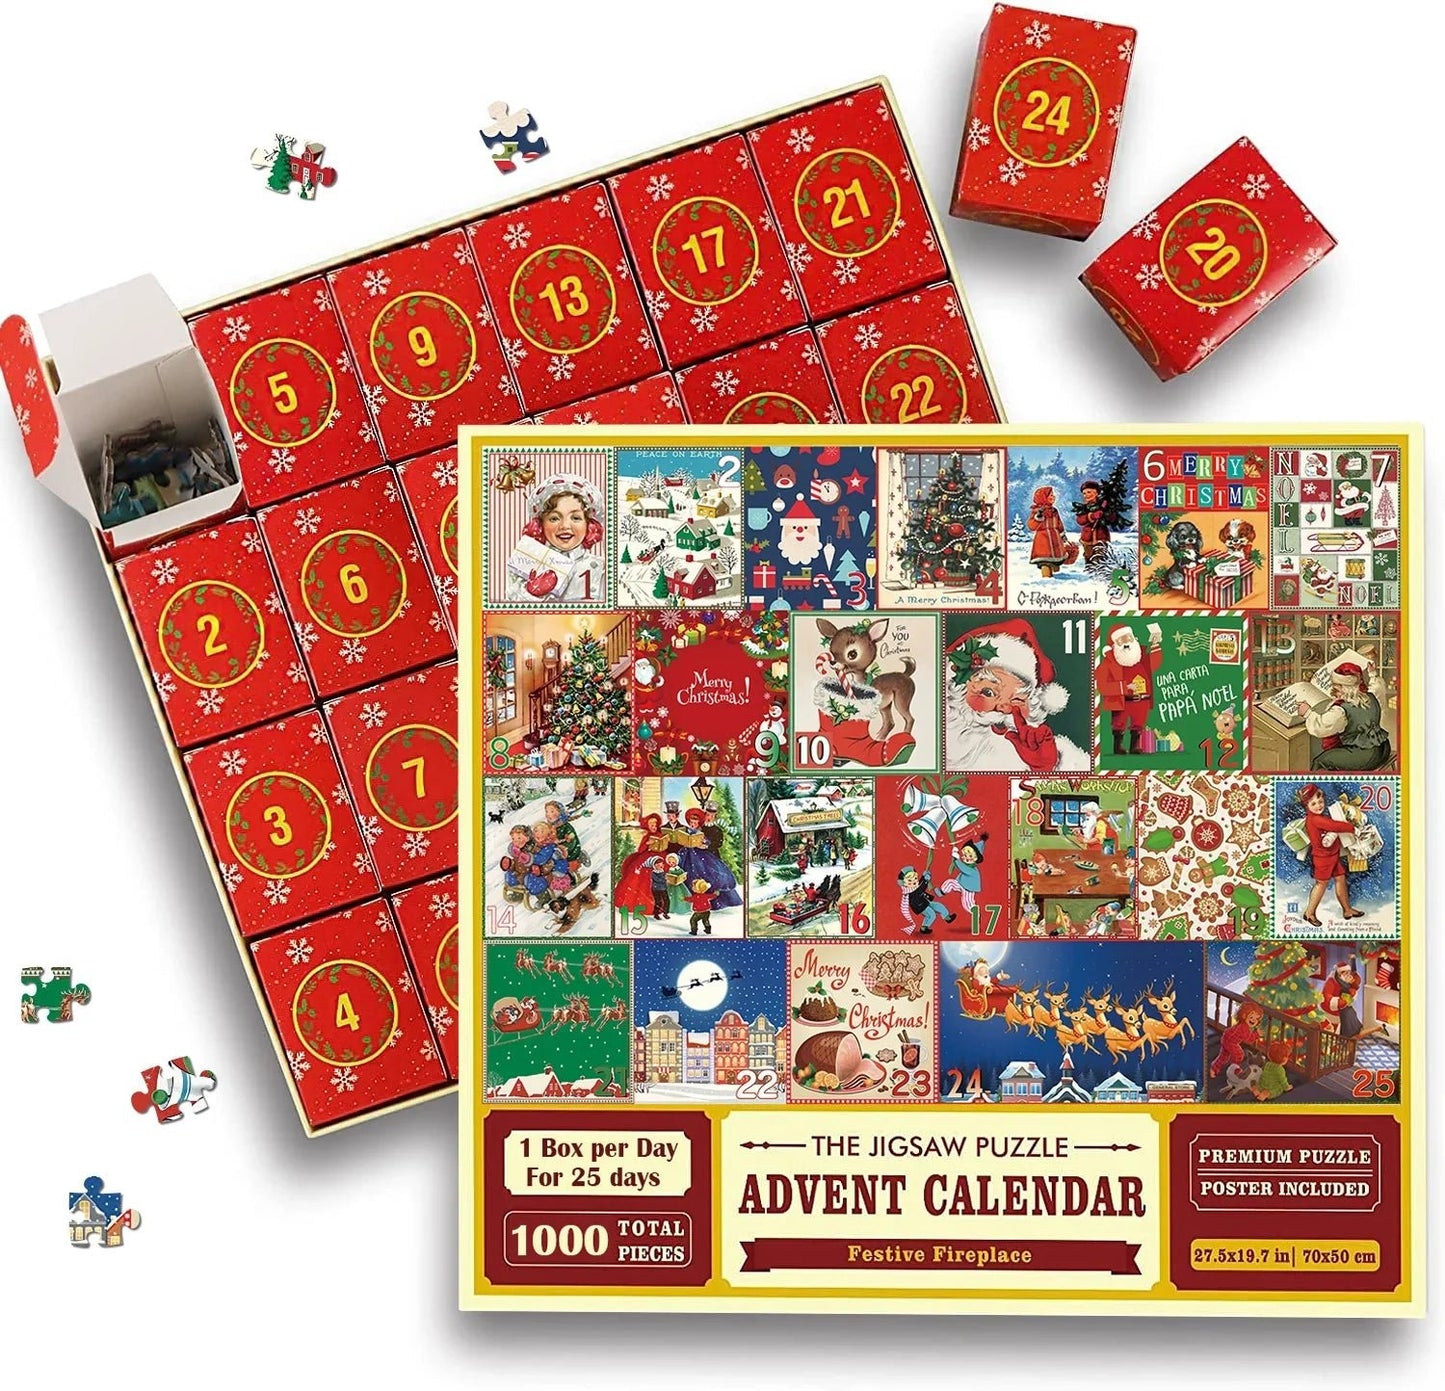 🎄Christmas Advent Calendar Puzzle Fun! 🧩 Count Down to the Holidays with Jigsaw Puzzles!